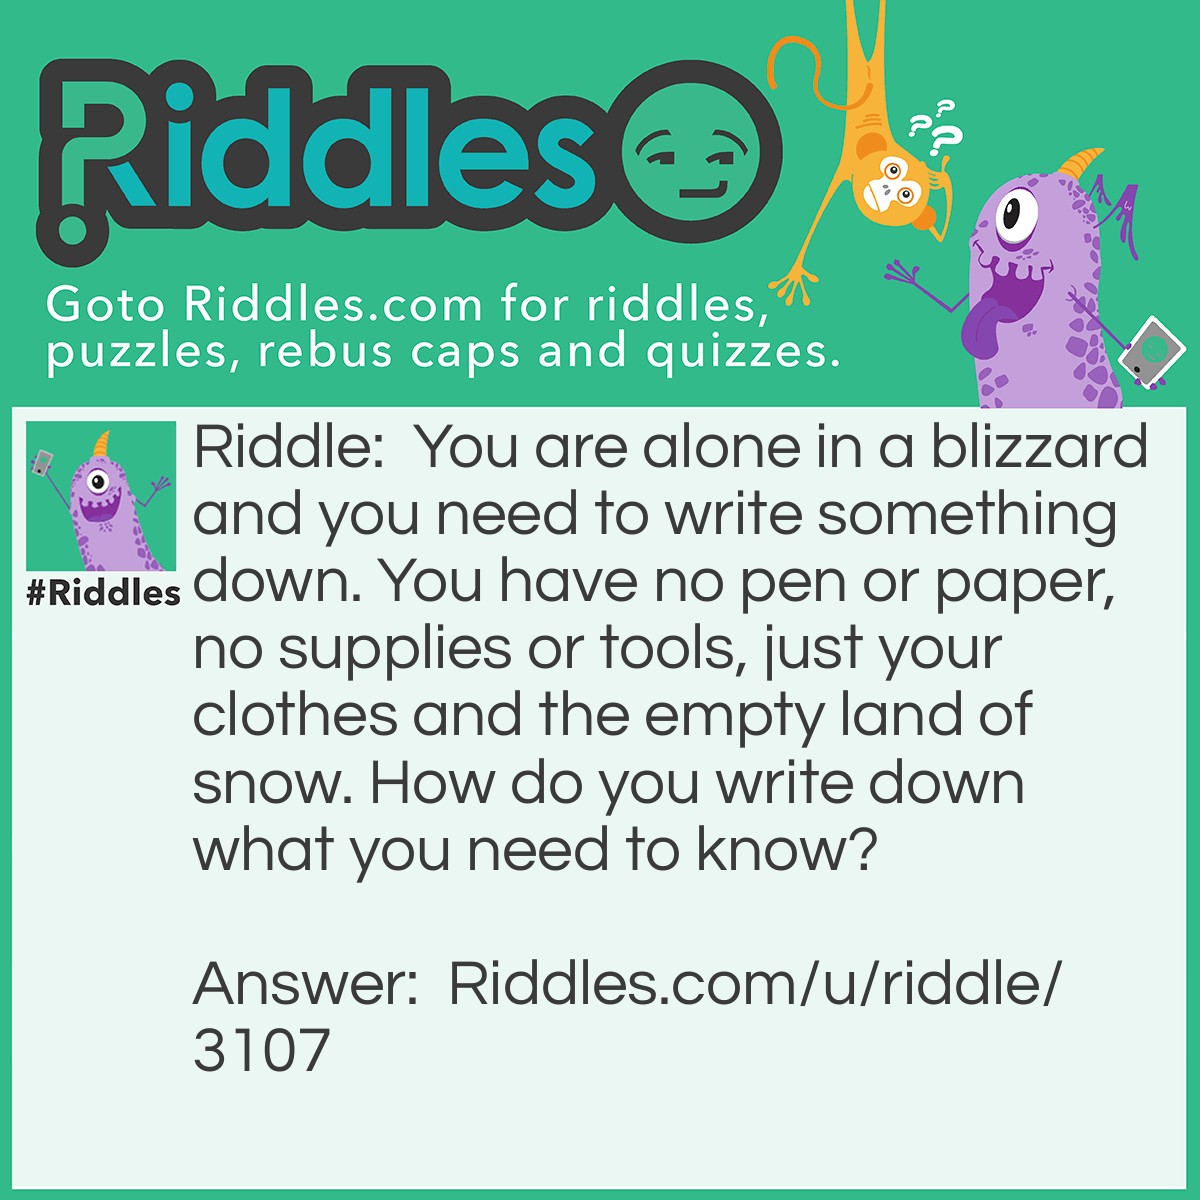 Riddle: You are alone in a blizzard and you need to write something down. You have no pen or paper, no supplies or tools, just your clothes and the empty land of snow. How do you write down what you need to know? Answer: You write in the snow.